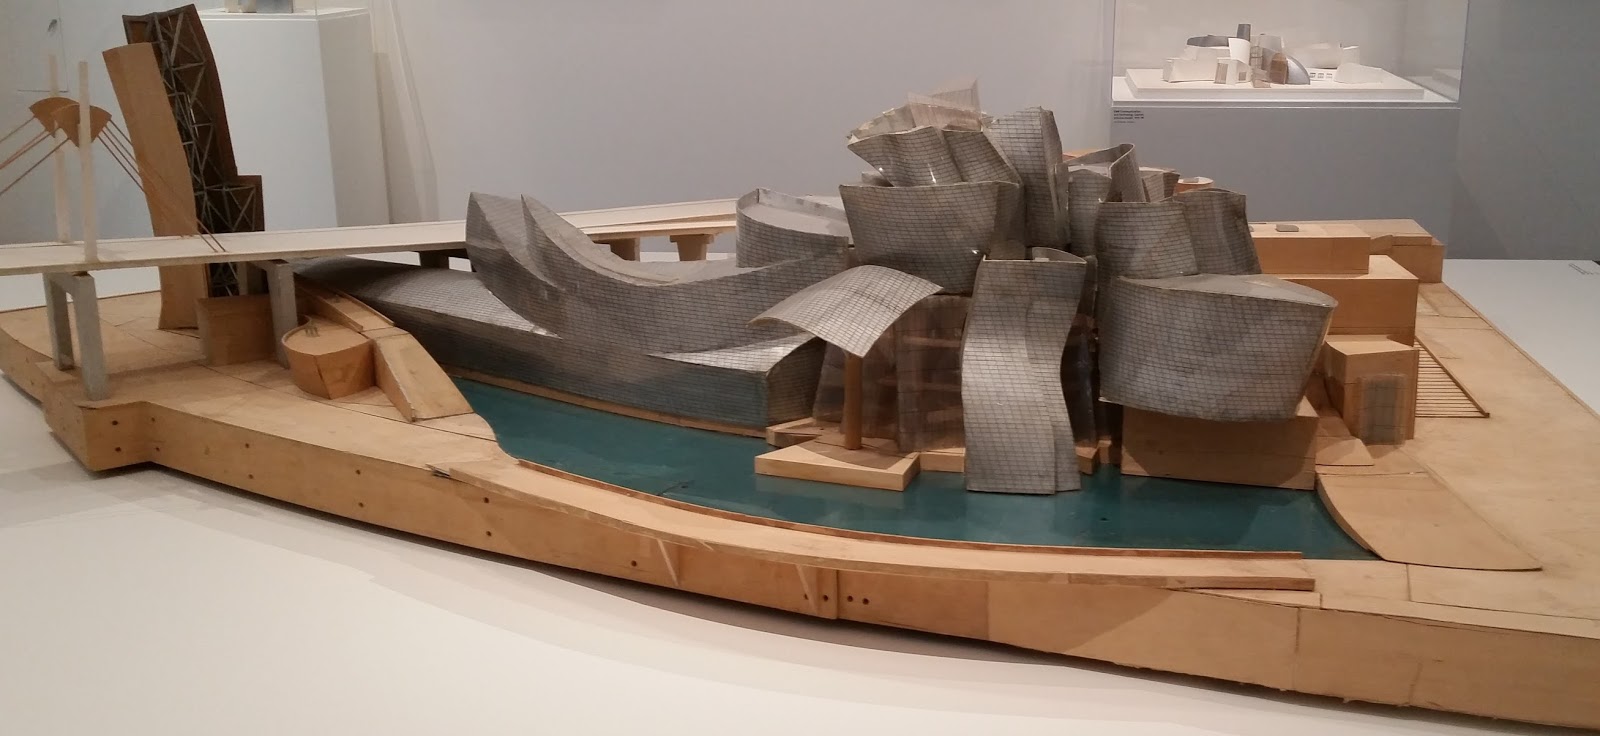 SPANGLER CUMMINGS...: Frank Gehry Exhibition at Los Angeles County Museum of Art